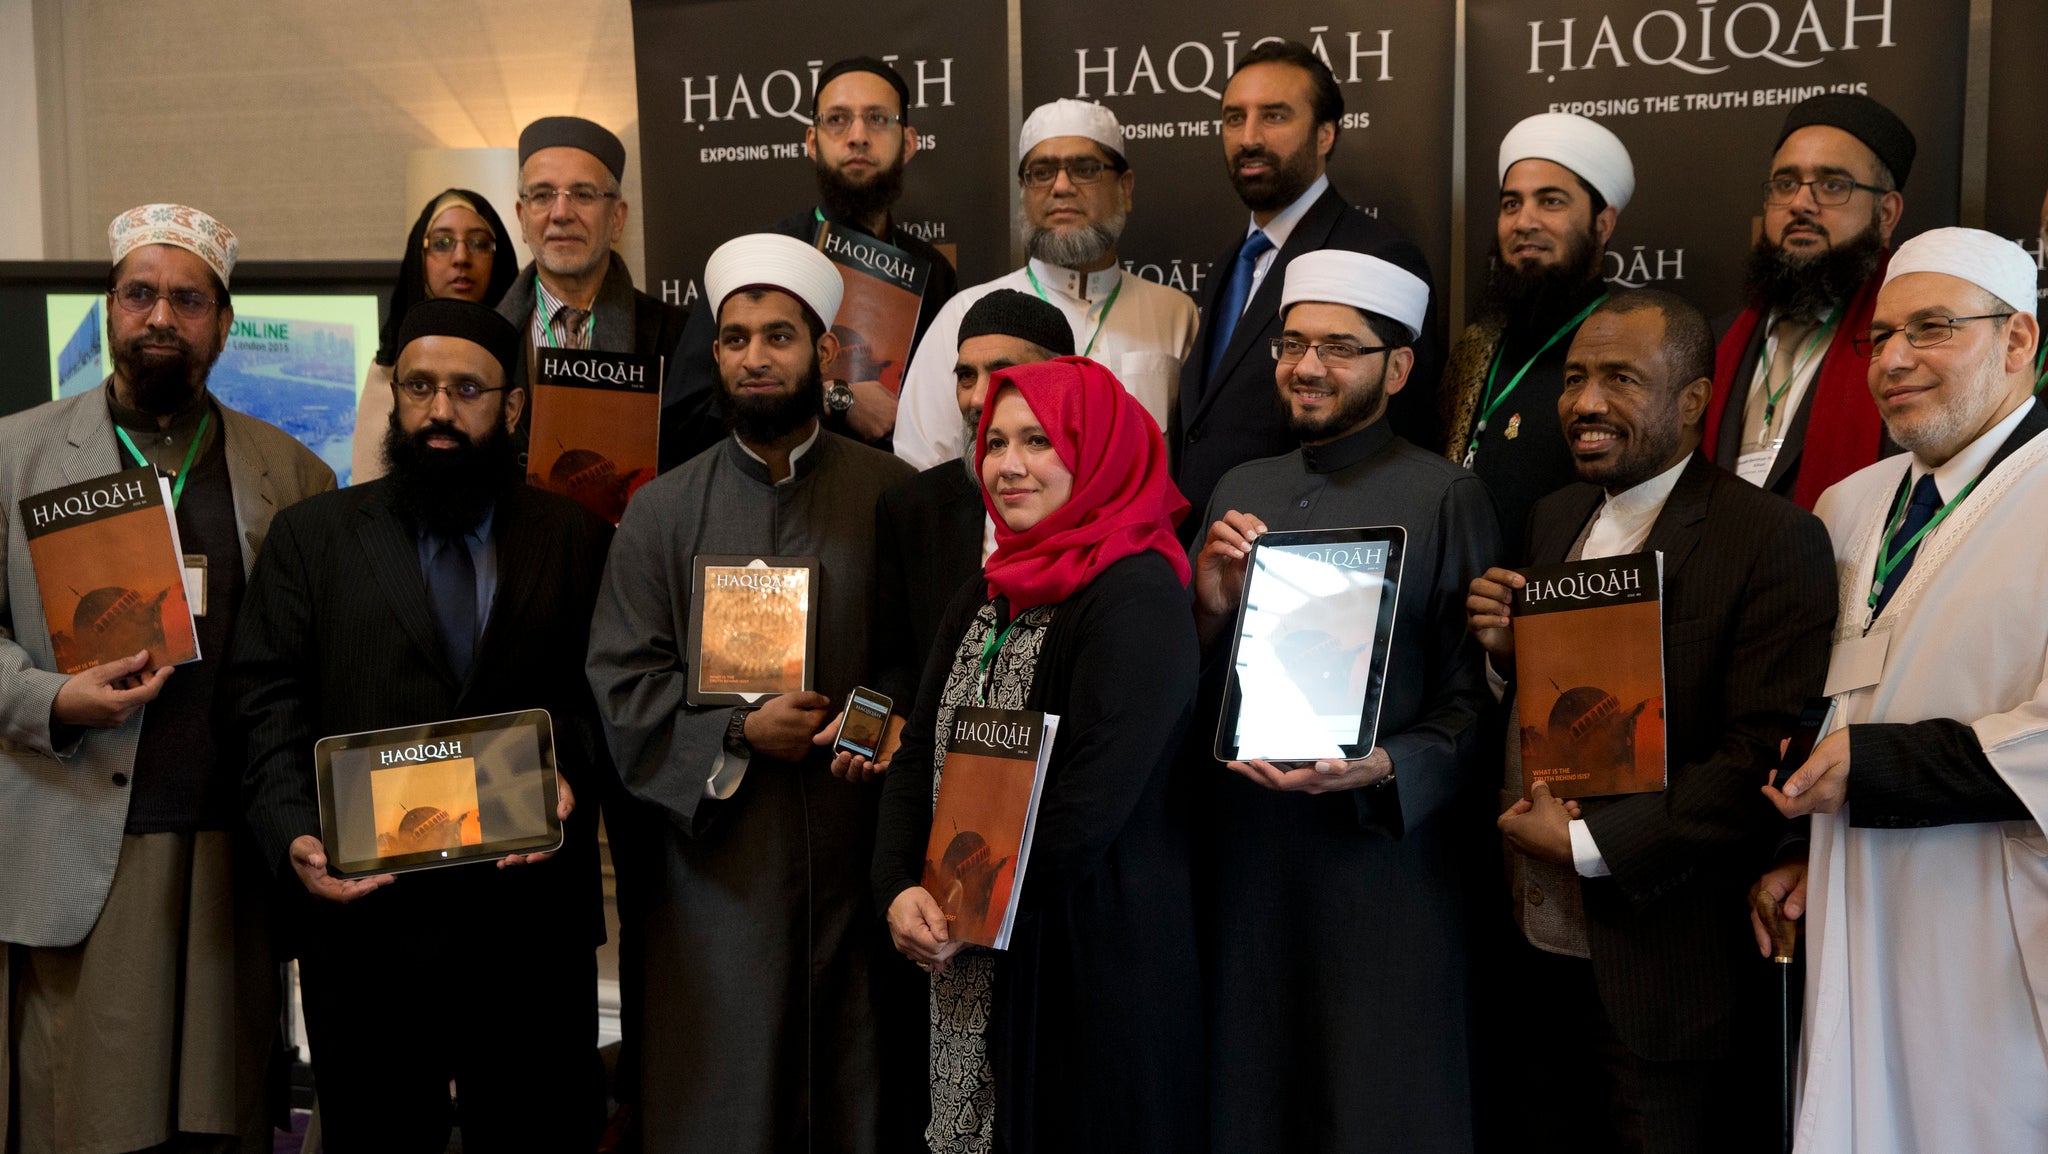 Imams, teachers and leaders at the launch of Haqiqah